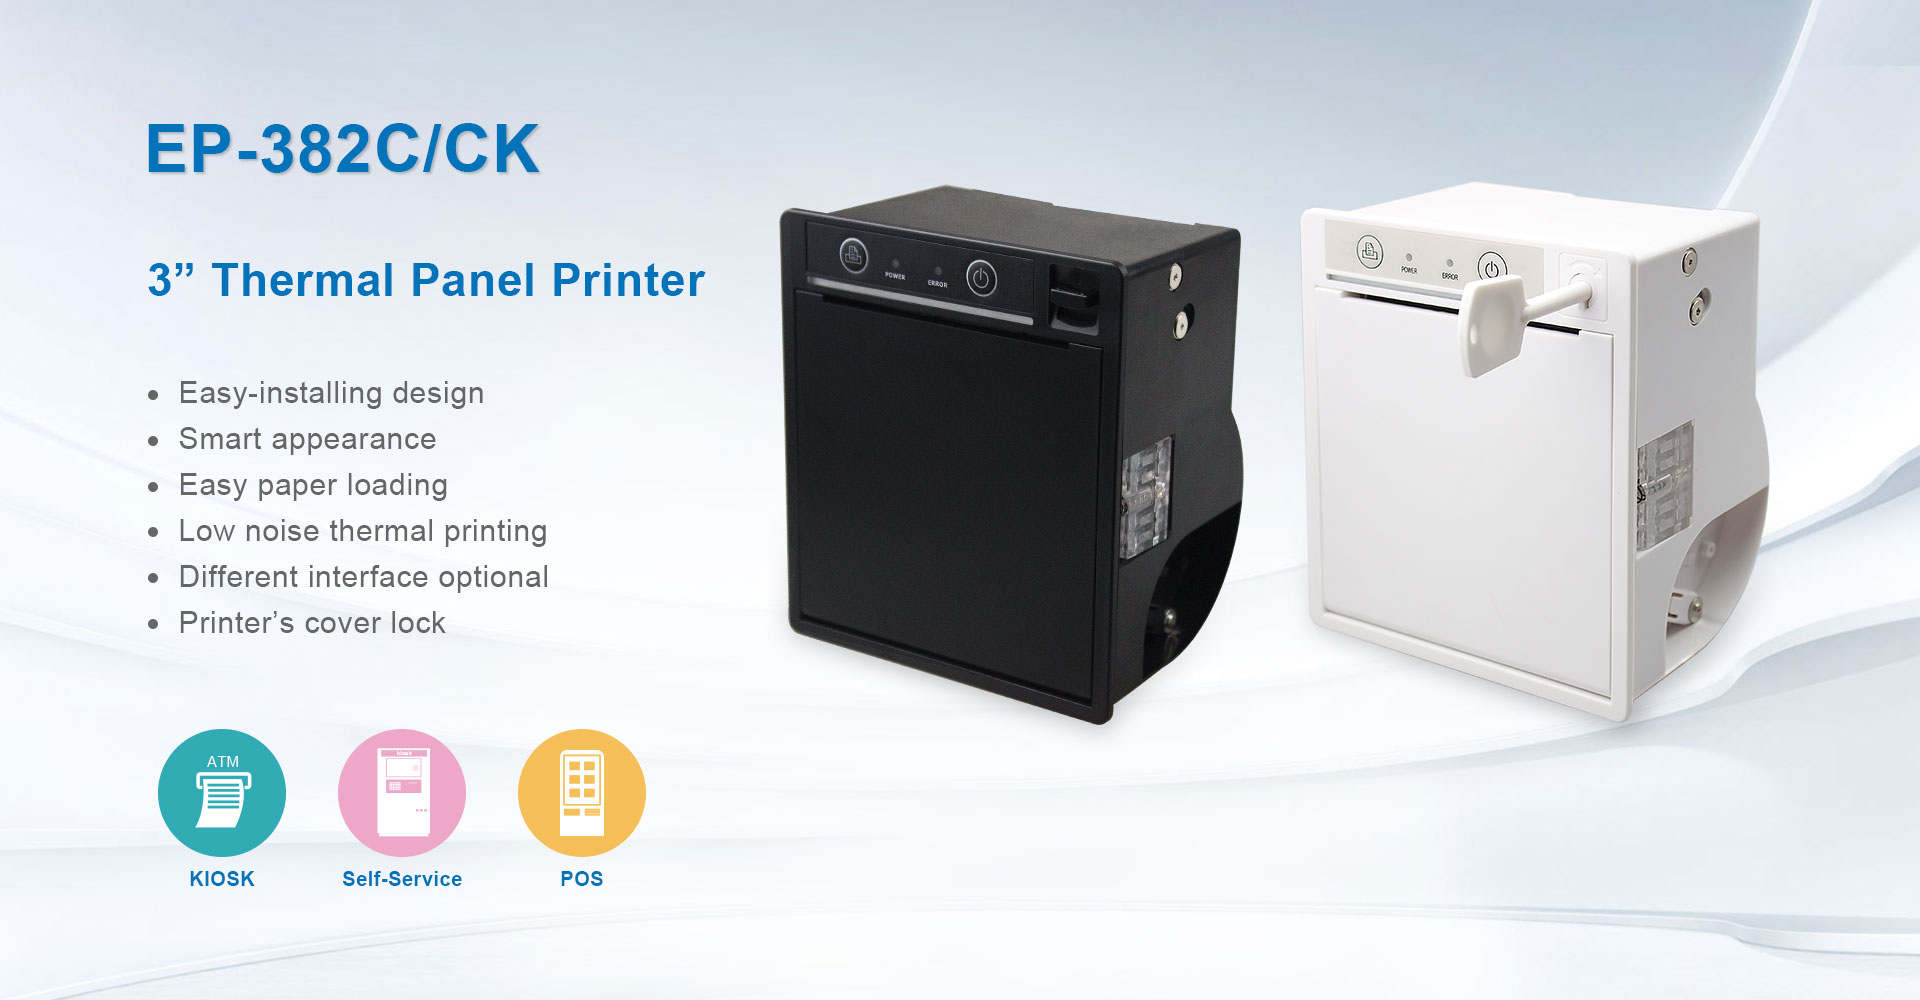 Thermal Panel Printer with Auto cutter